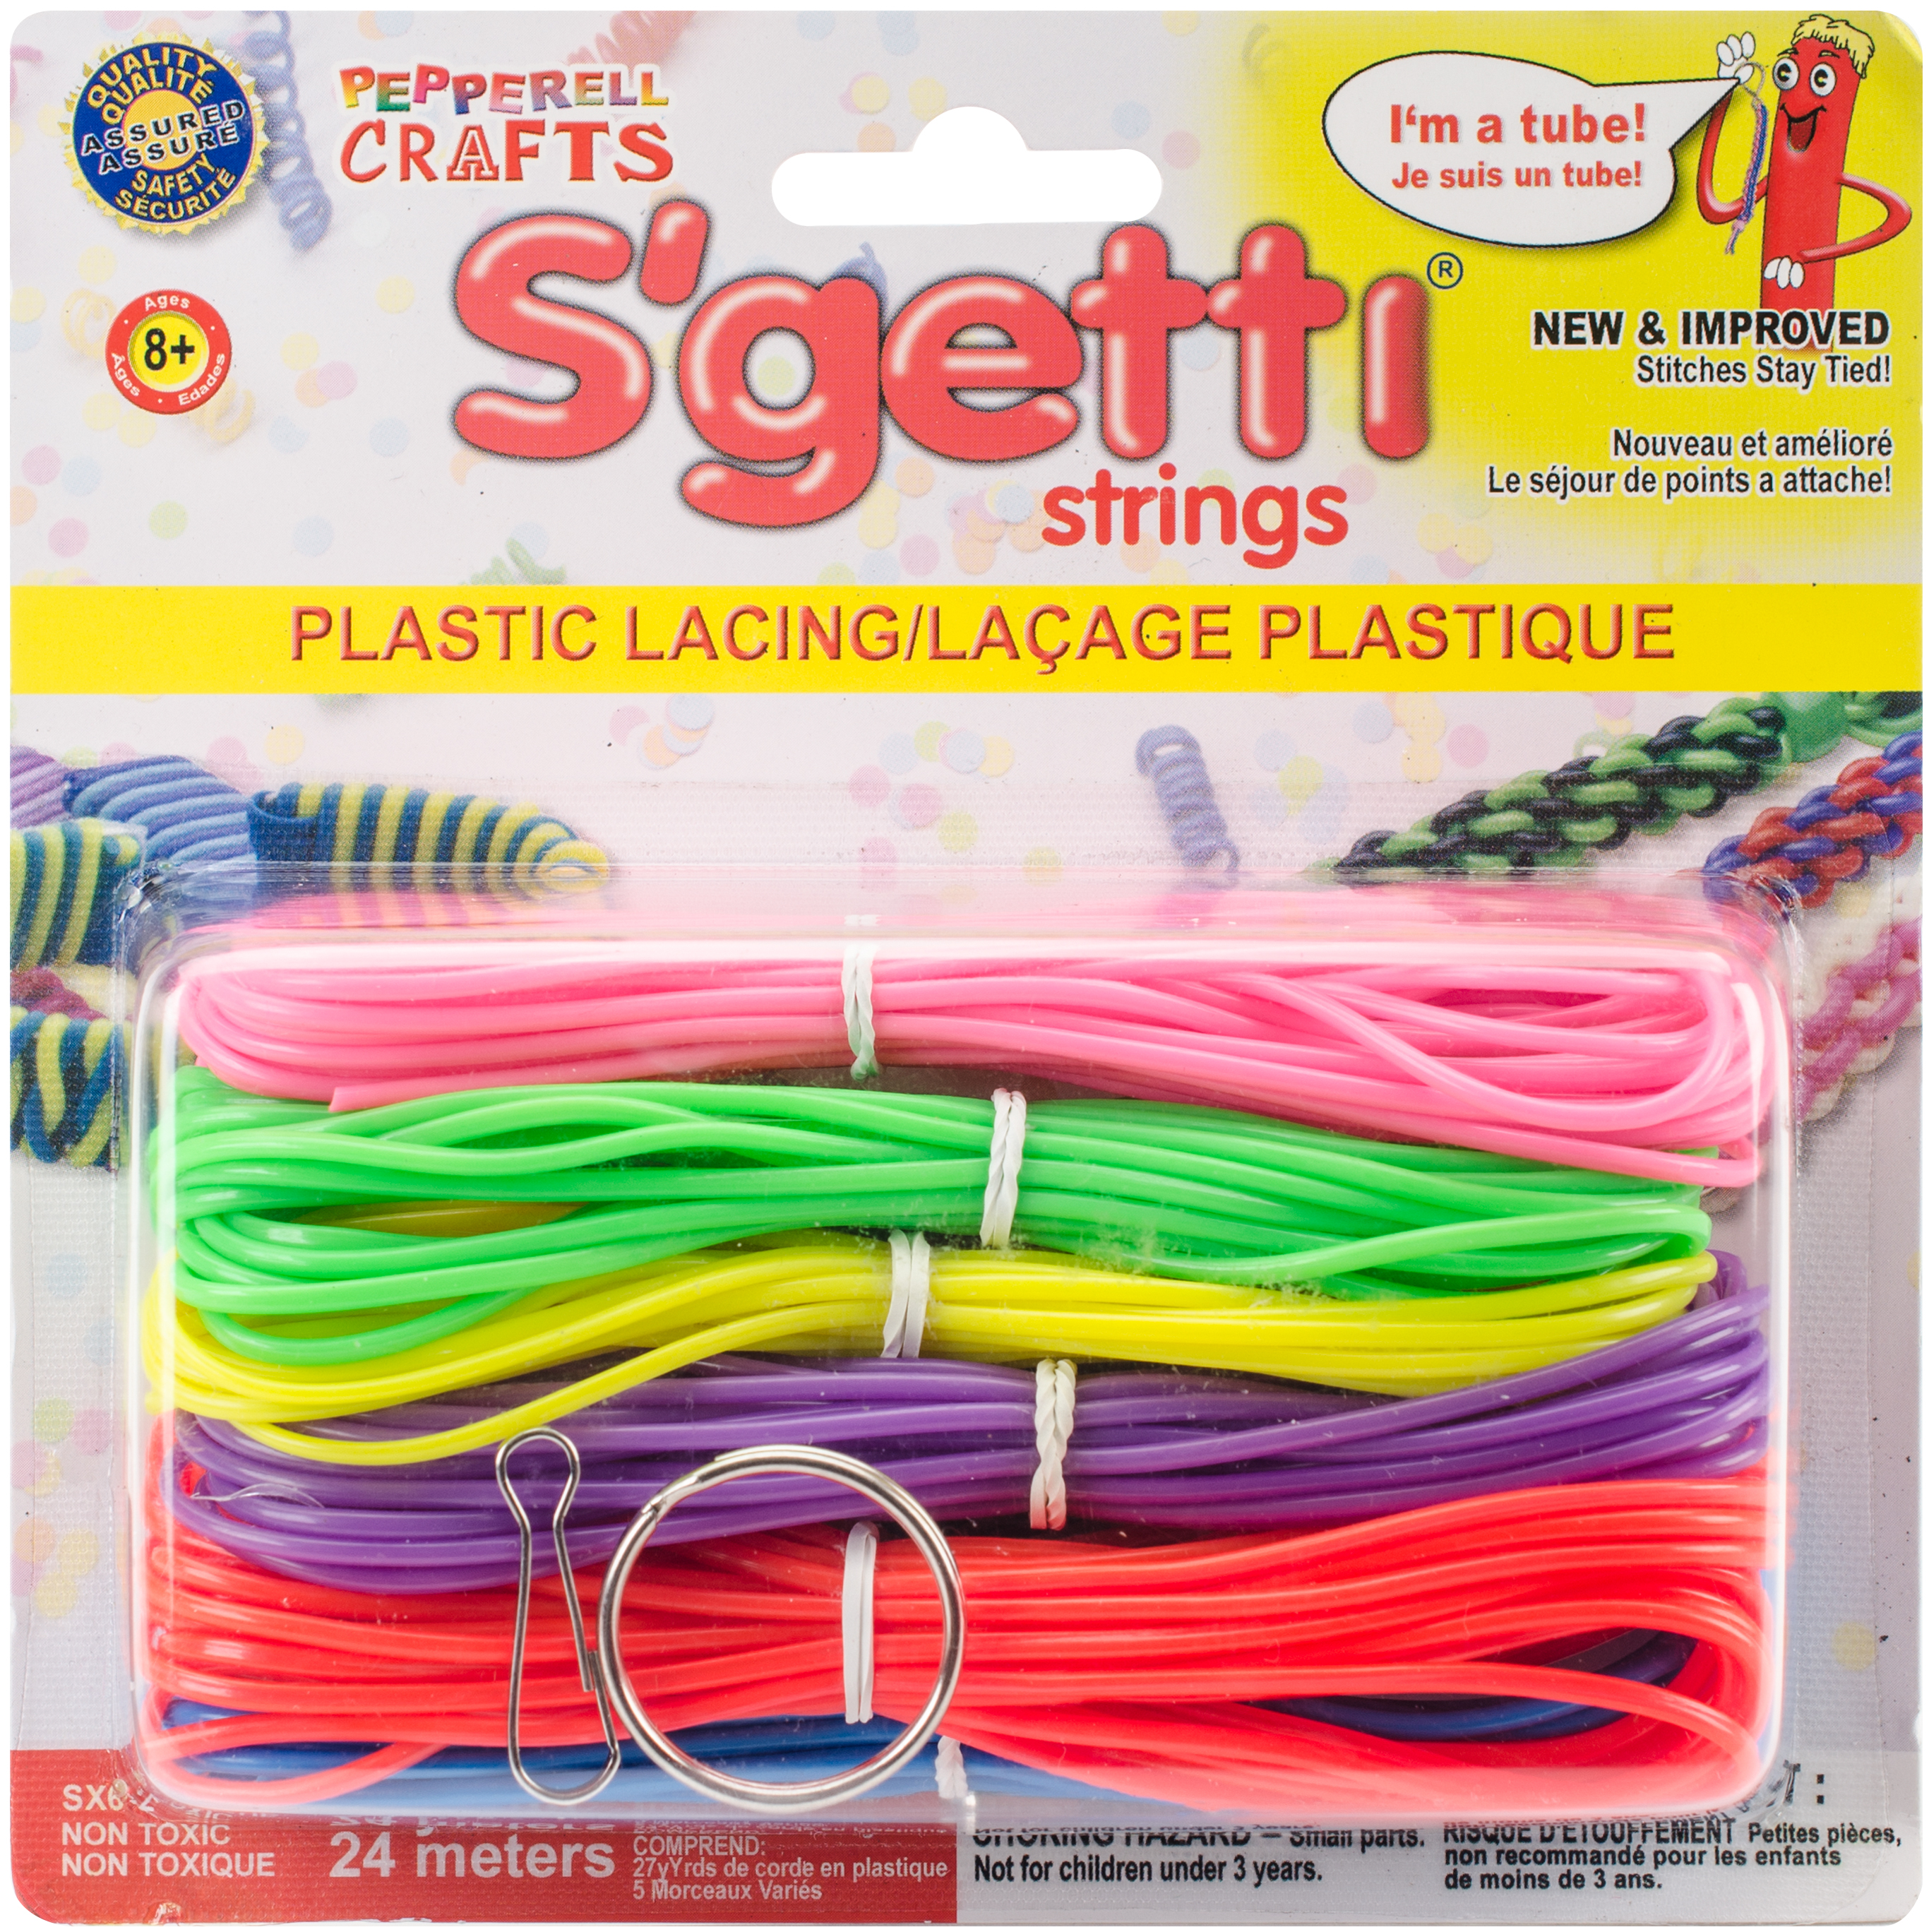 Pepperell S'getti Strings Plastic Lacing 27yd-Neon SX6-2